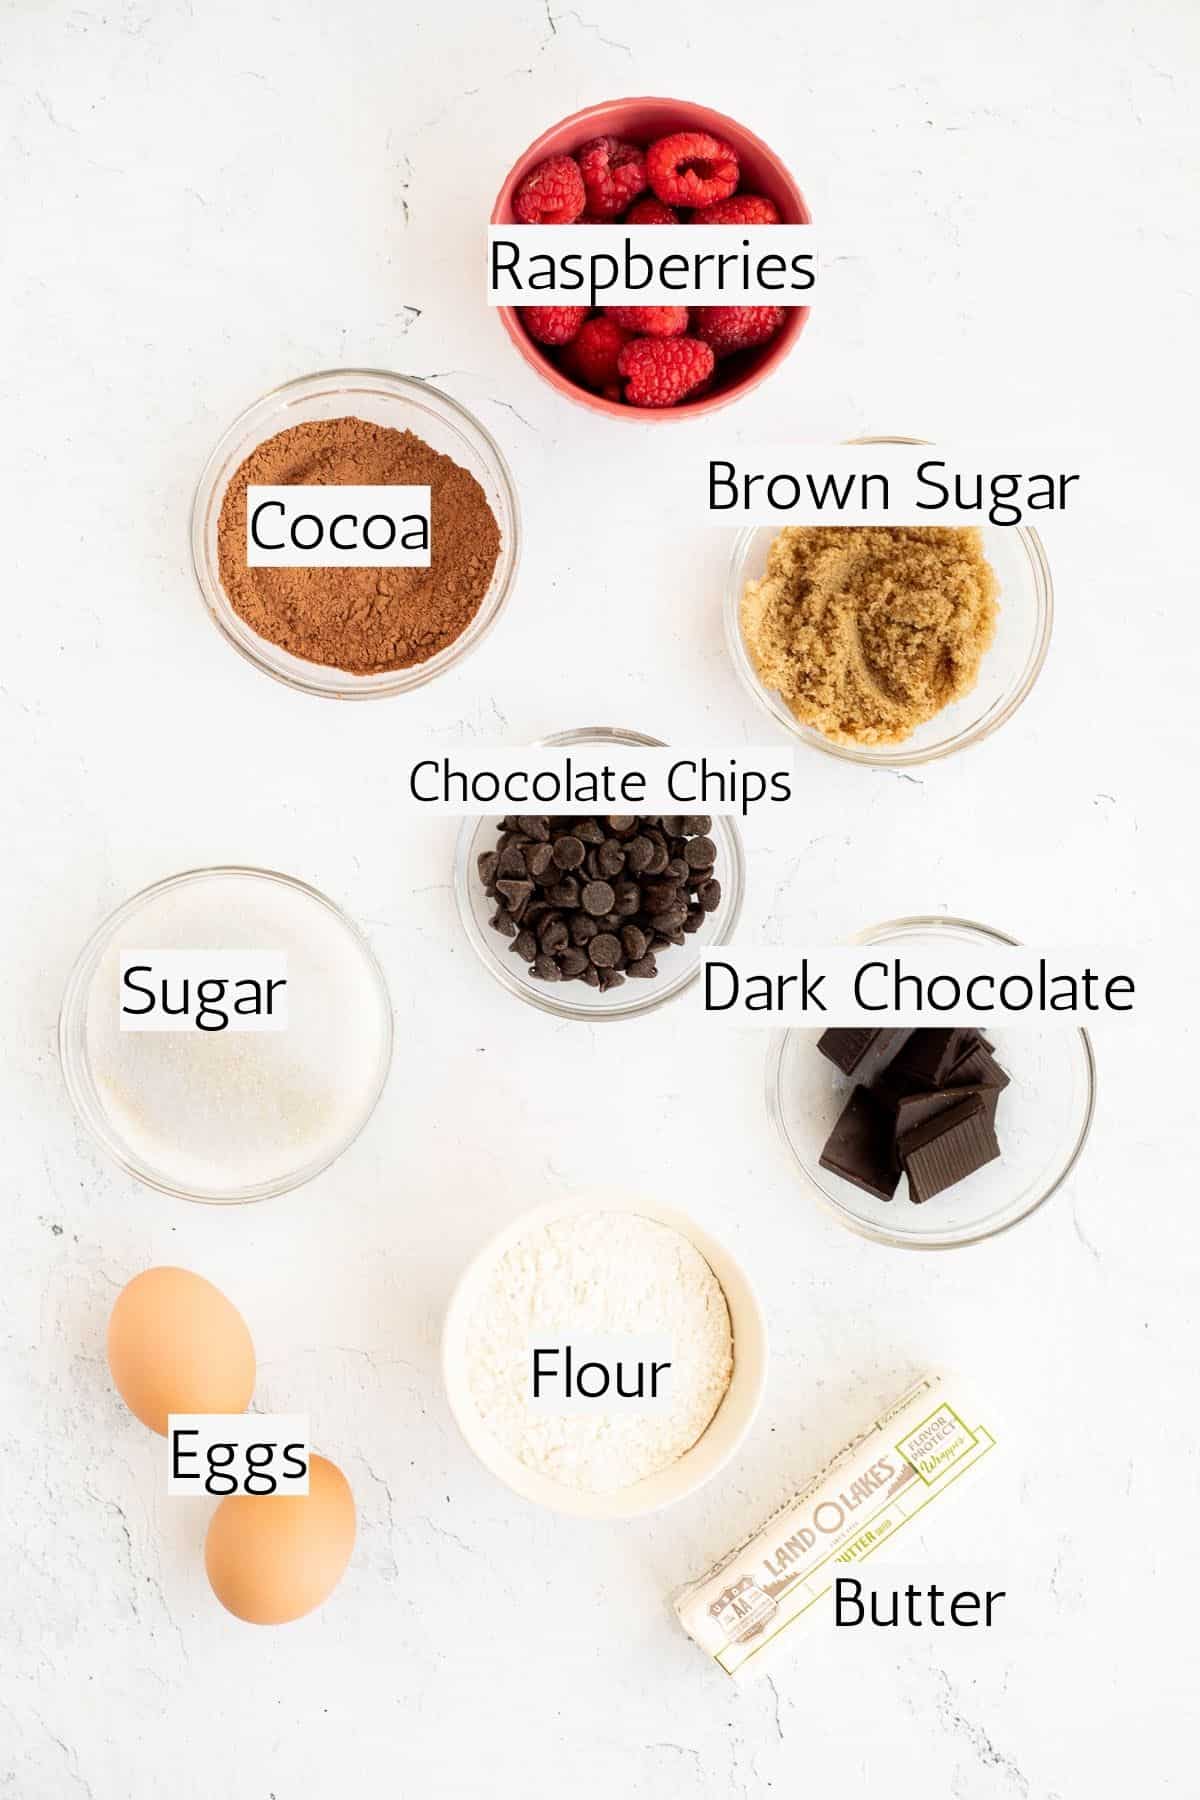 ingredients for raspberry brownies labeled with black text.